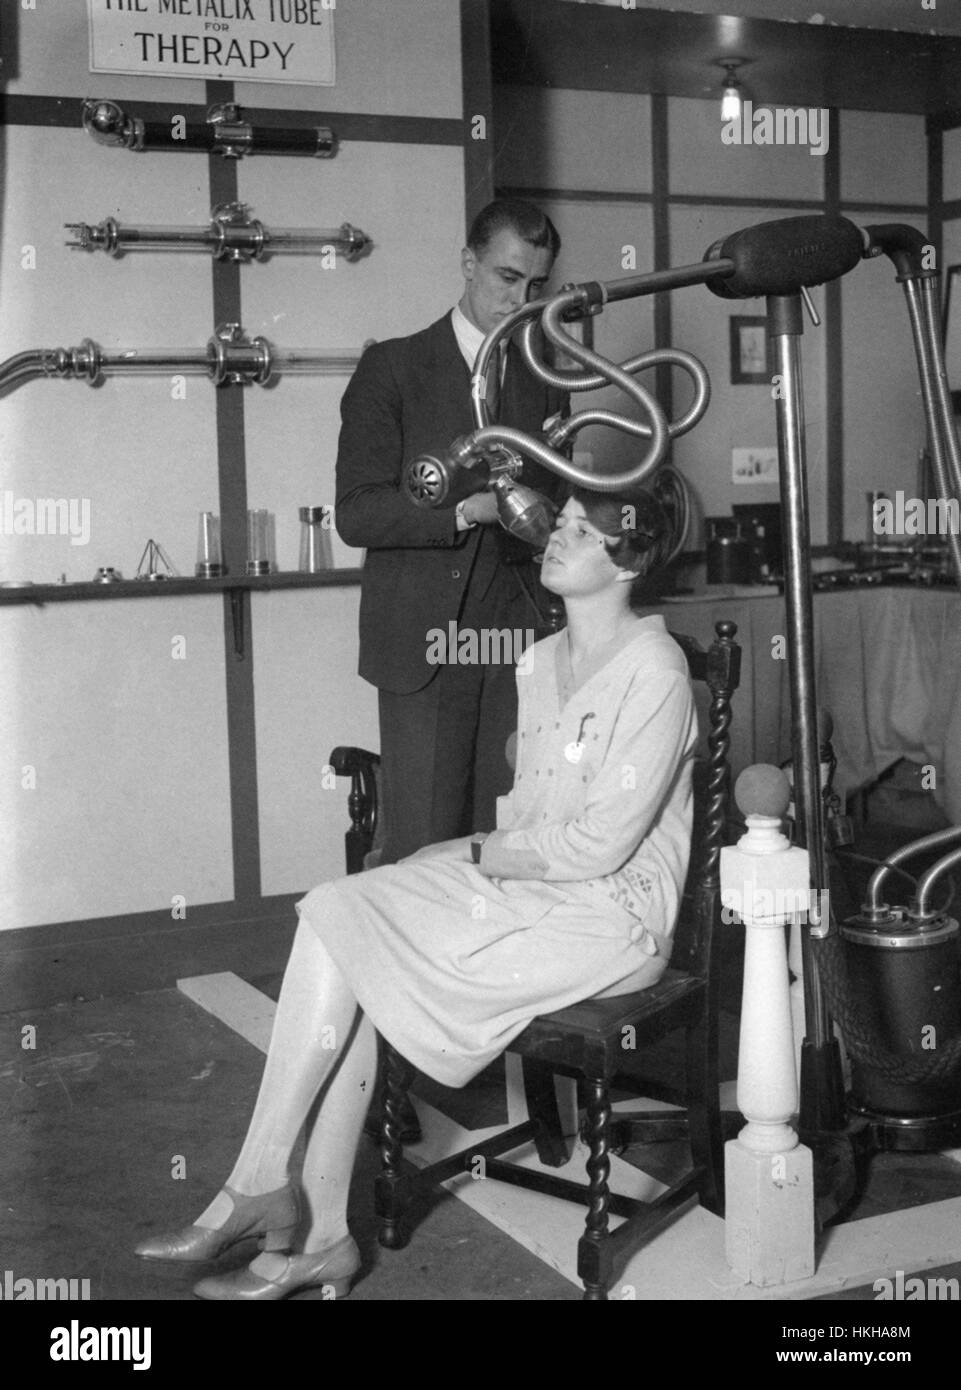 METALIX TUBE FOR THERAPY  A type of x-ray machine made by the Philips/Muller company on show at a London exhibition in November 1928 Stock Photo